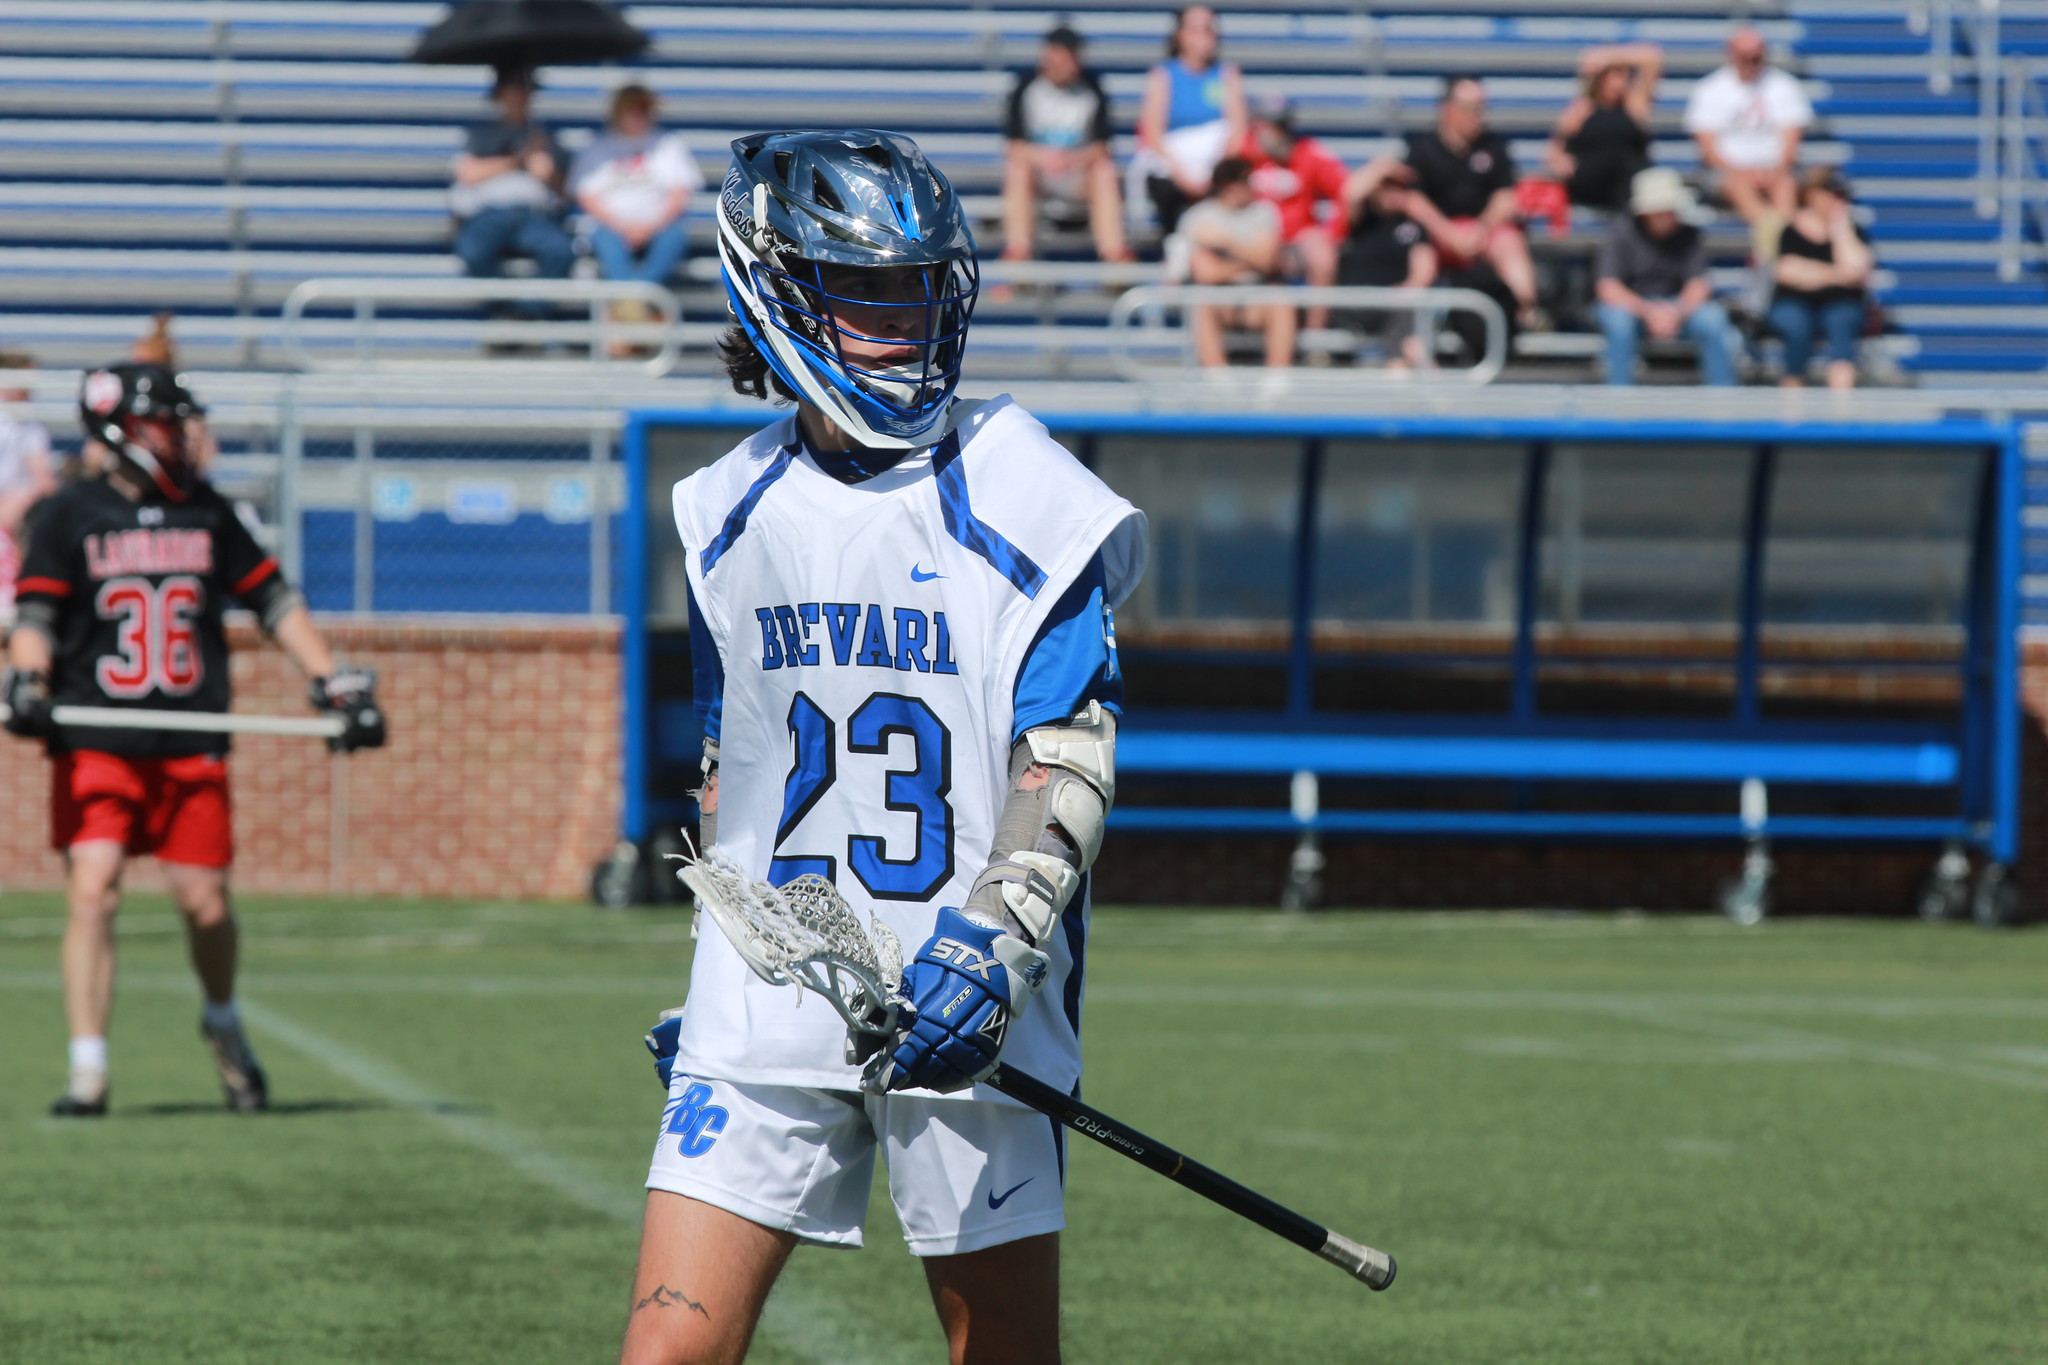 MLAX Bested by Pacers on the Road, 17-5